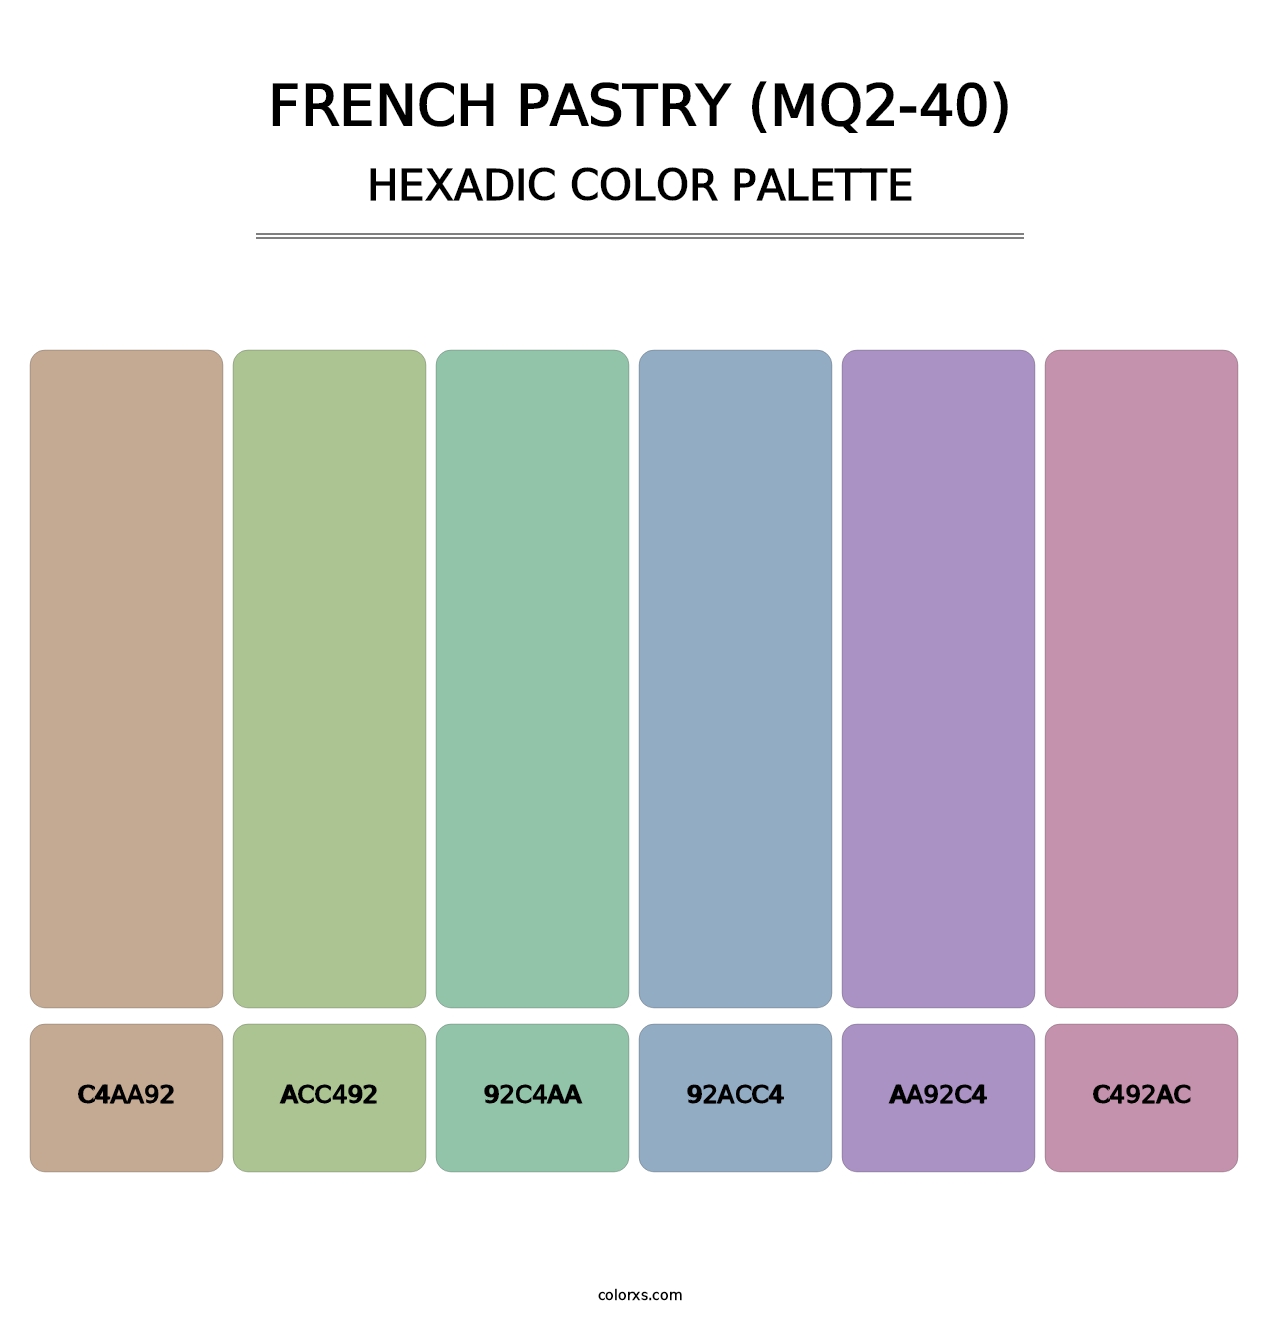 French Pastry (MQ2-40) - Hexadic Color Palette